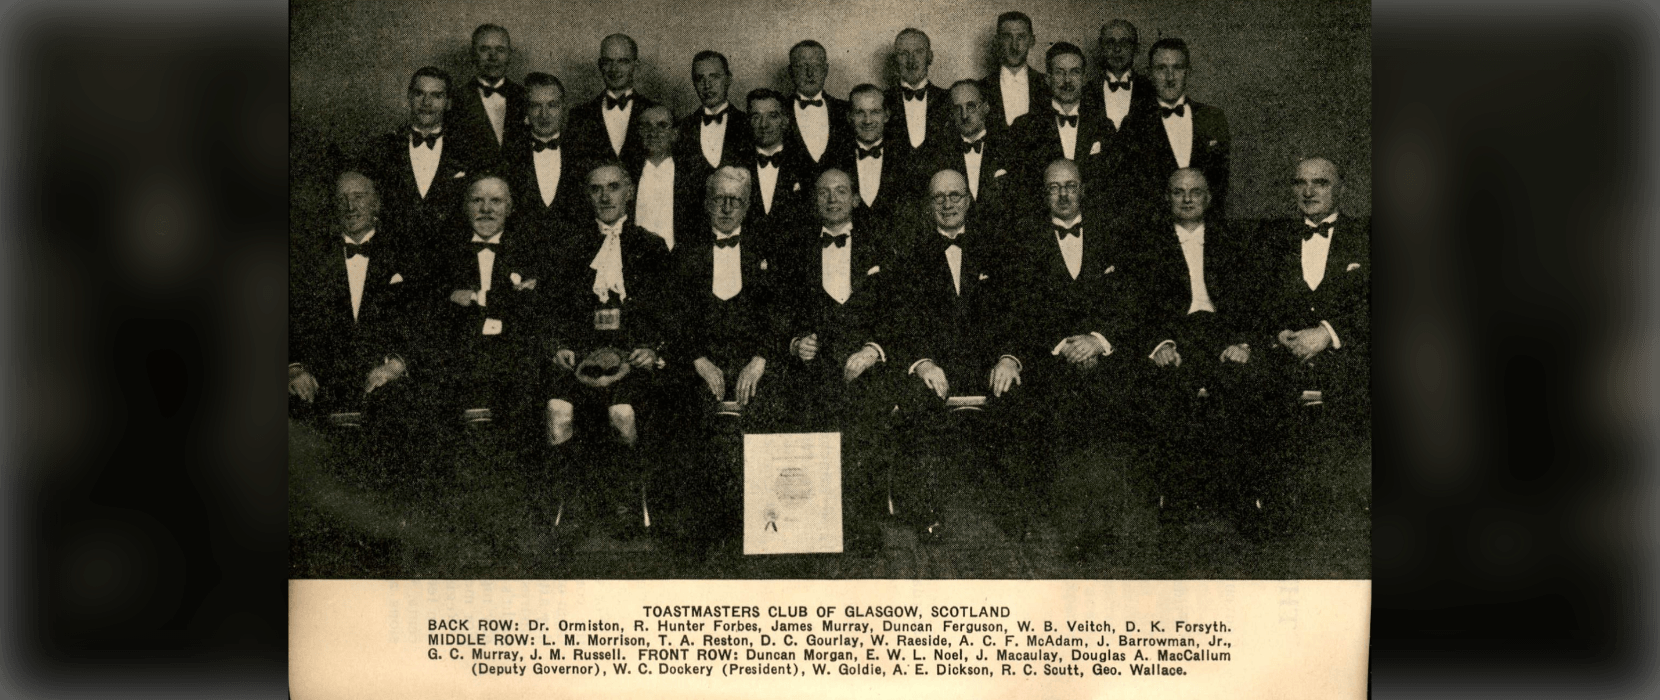 Large group of men wearing tuxedos sitting in rows